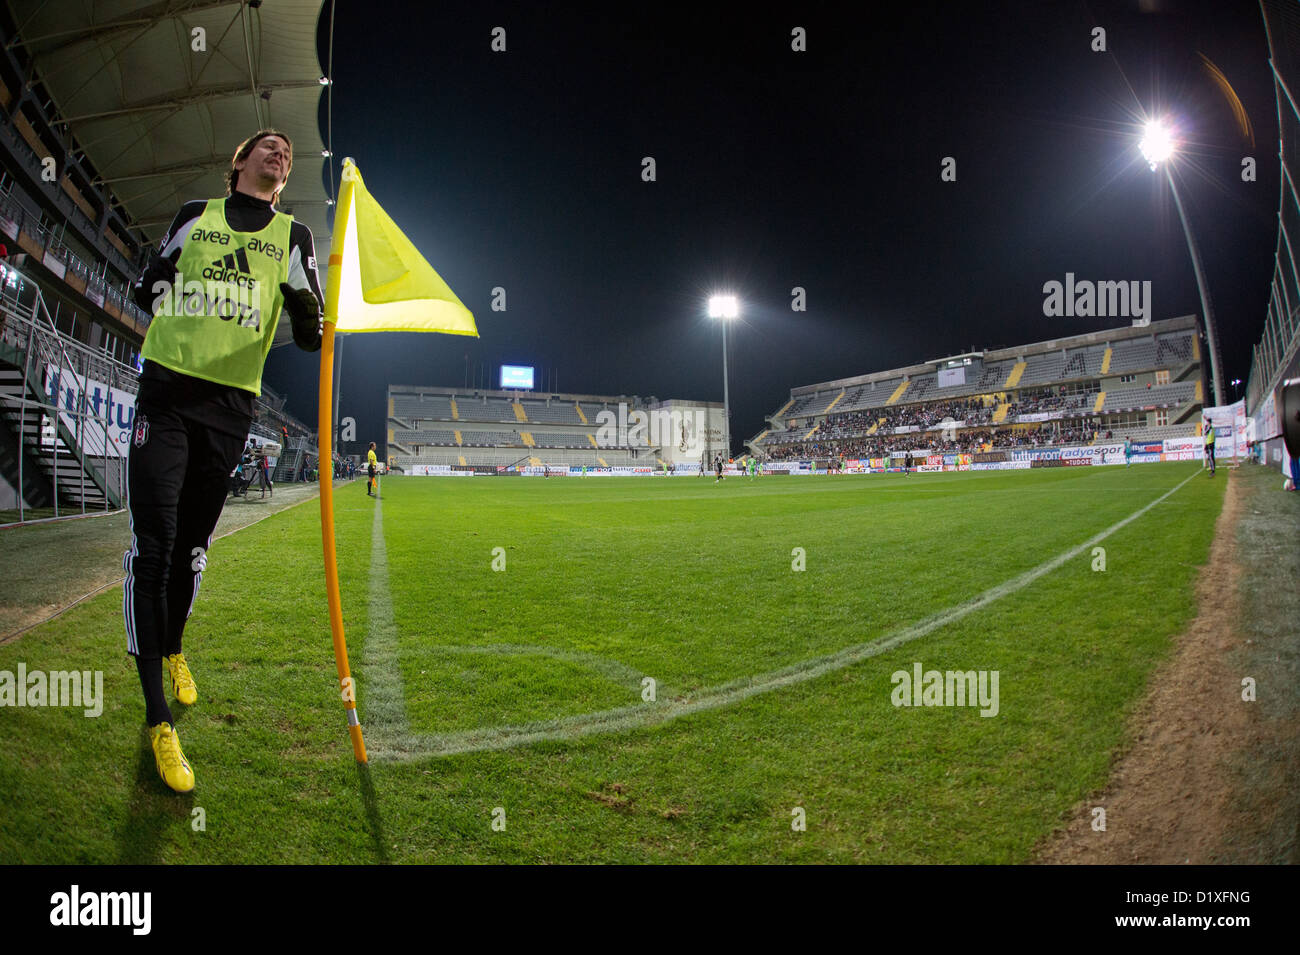 View of the stadium during the Tuttur Cup soccer match between Besiktas Istanbul and VfL Wolfsburg at Mardan Stadium in Antalya, Turkey, 06 January 2013. The Tuttur Cup is a yearly competition held at the winter break of the Bundesliga soccer clubs. Photo: Soeren Stache Stock Photo